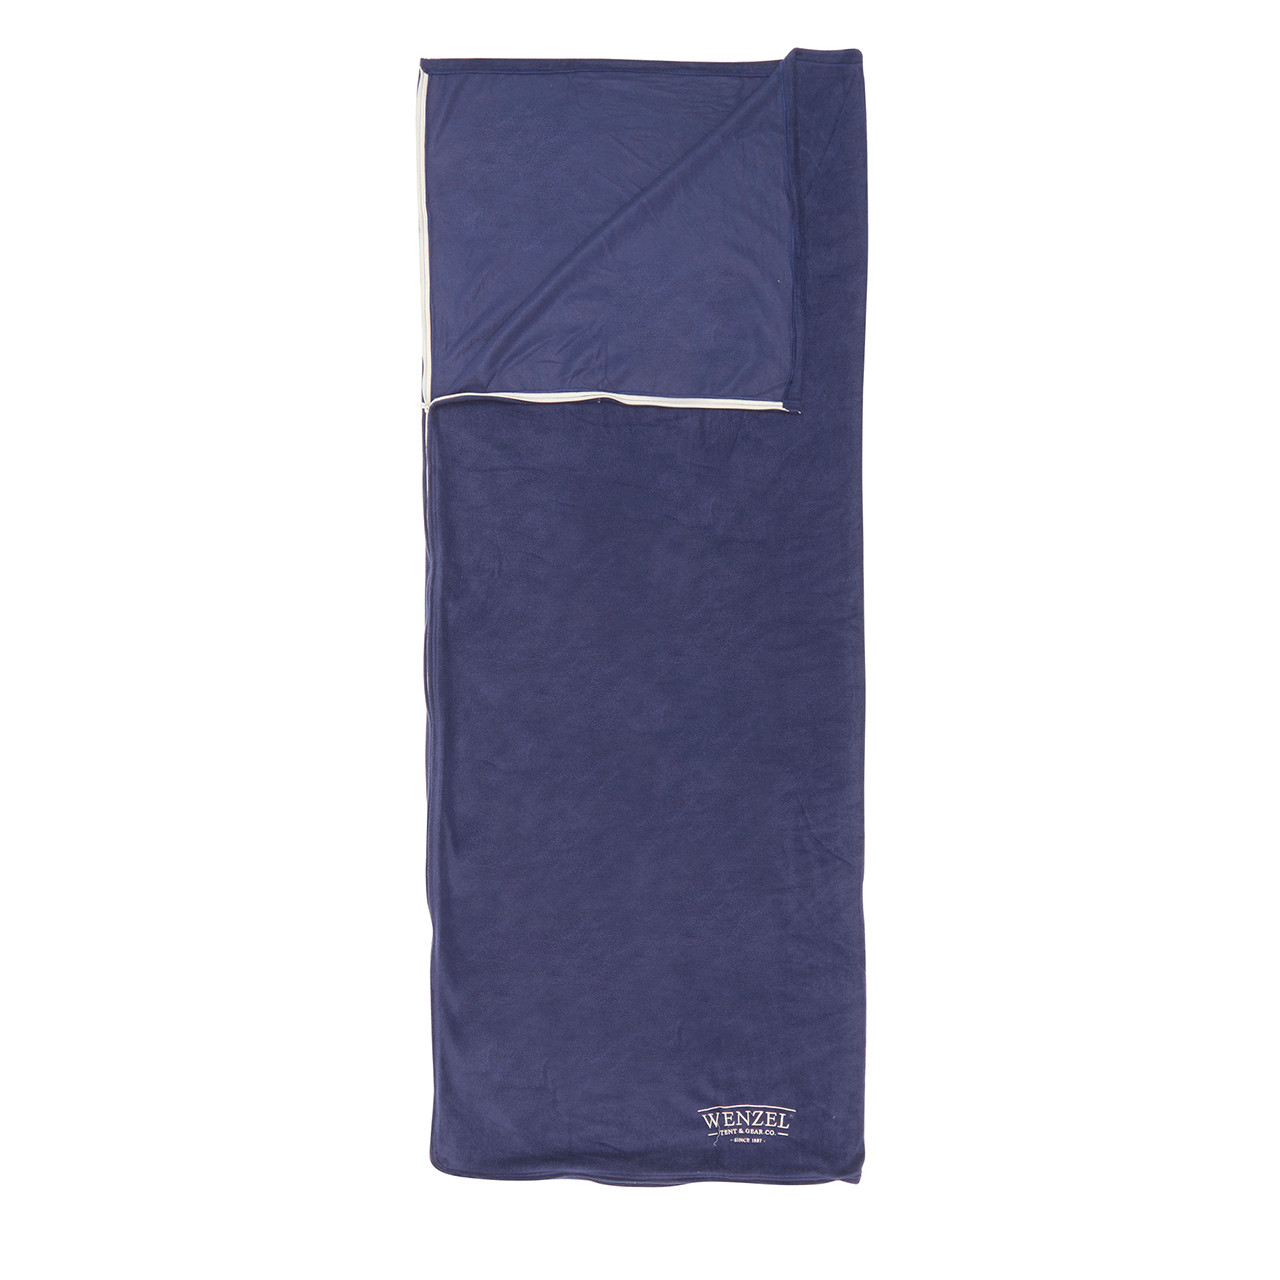 Wenzel Flannery Fleece sleeping bag, purple, laying flat with the zipper corner partially open and folded over showing the purple interior of the sleeping bag